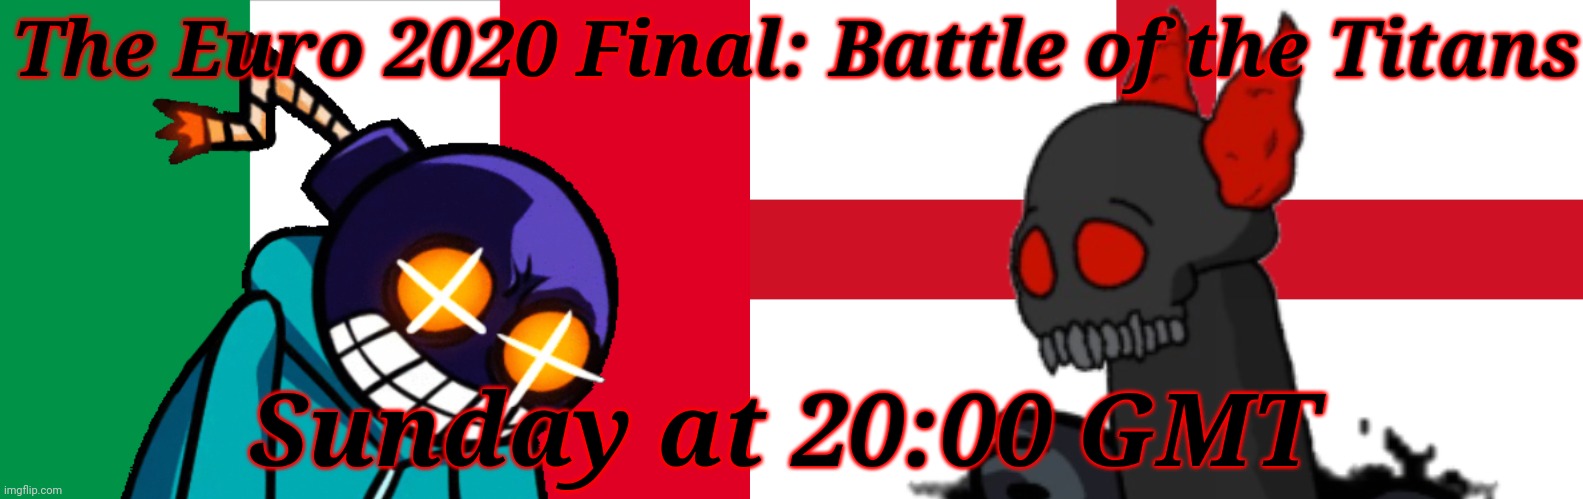 Italy vs England: Battle of The Titans | The Euro 2020 Final: Battle of the Titans; Sunday at 20:00 GMT | image tagged in italy,england,mad whitty,tricky,euro 2020,friday night funkin | made w/ Imgflip meme maker